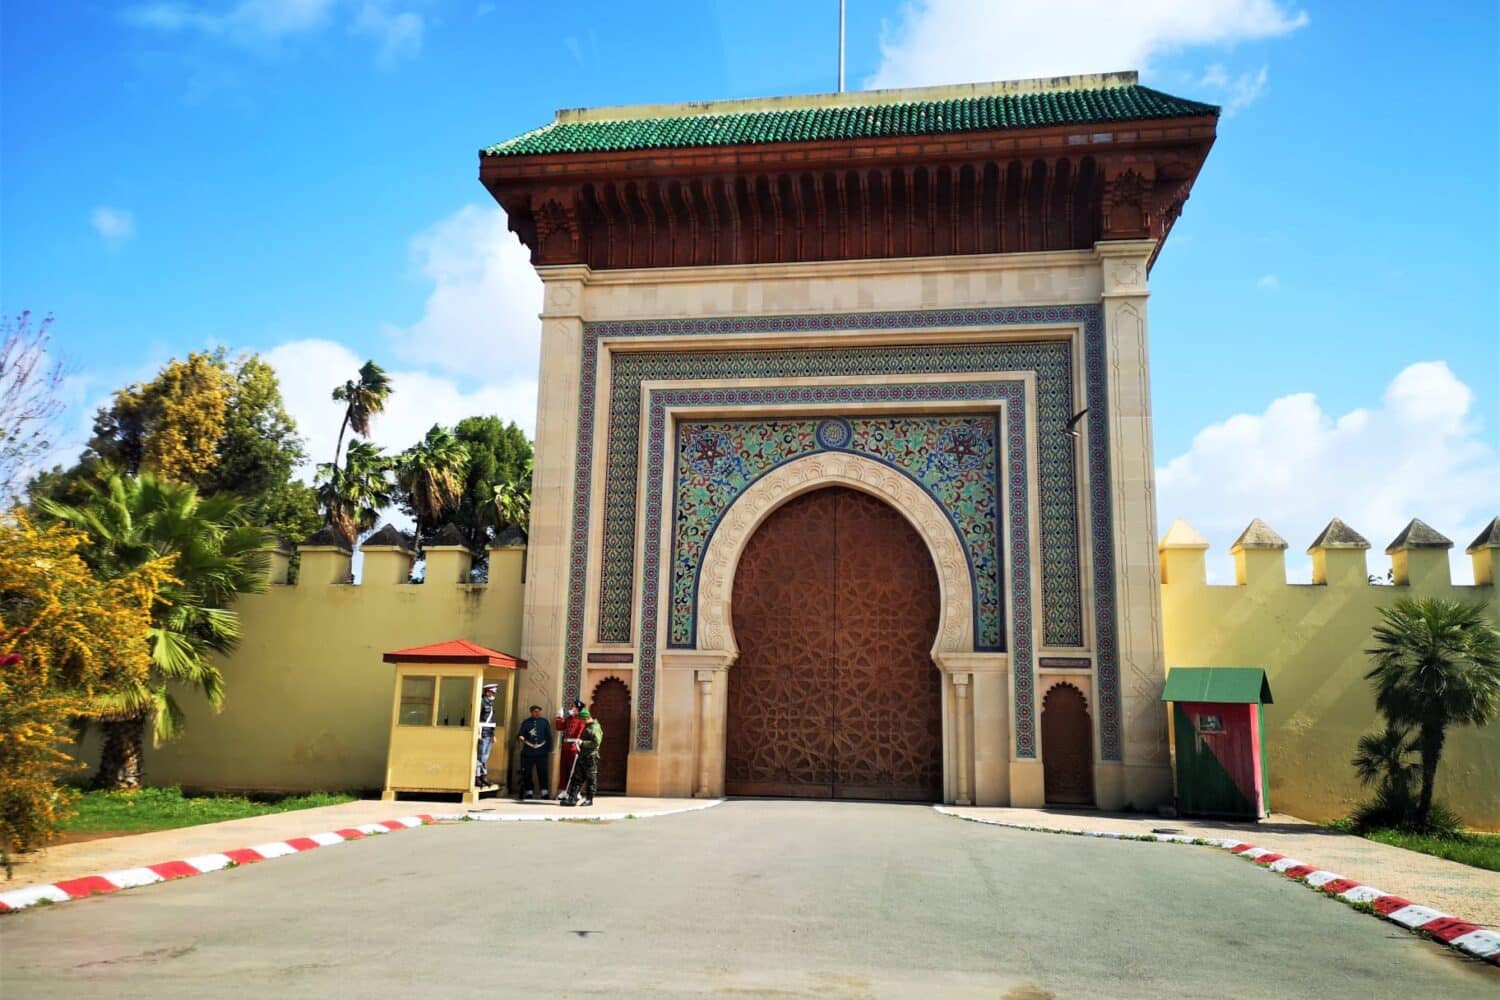 Vacation packages for Morocco